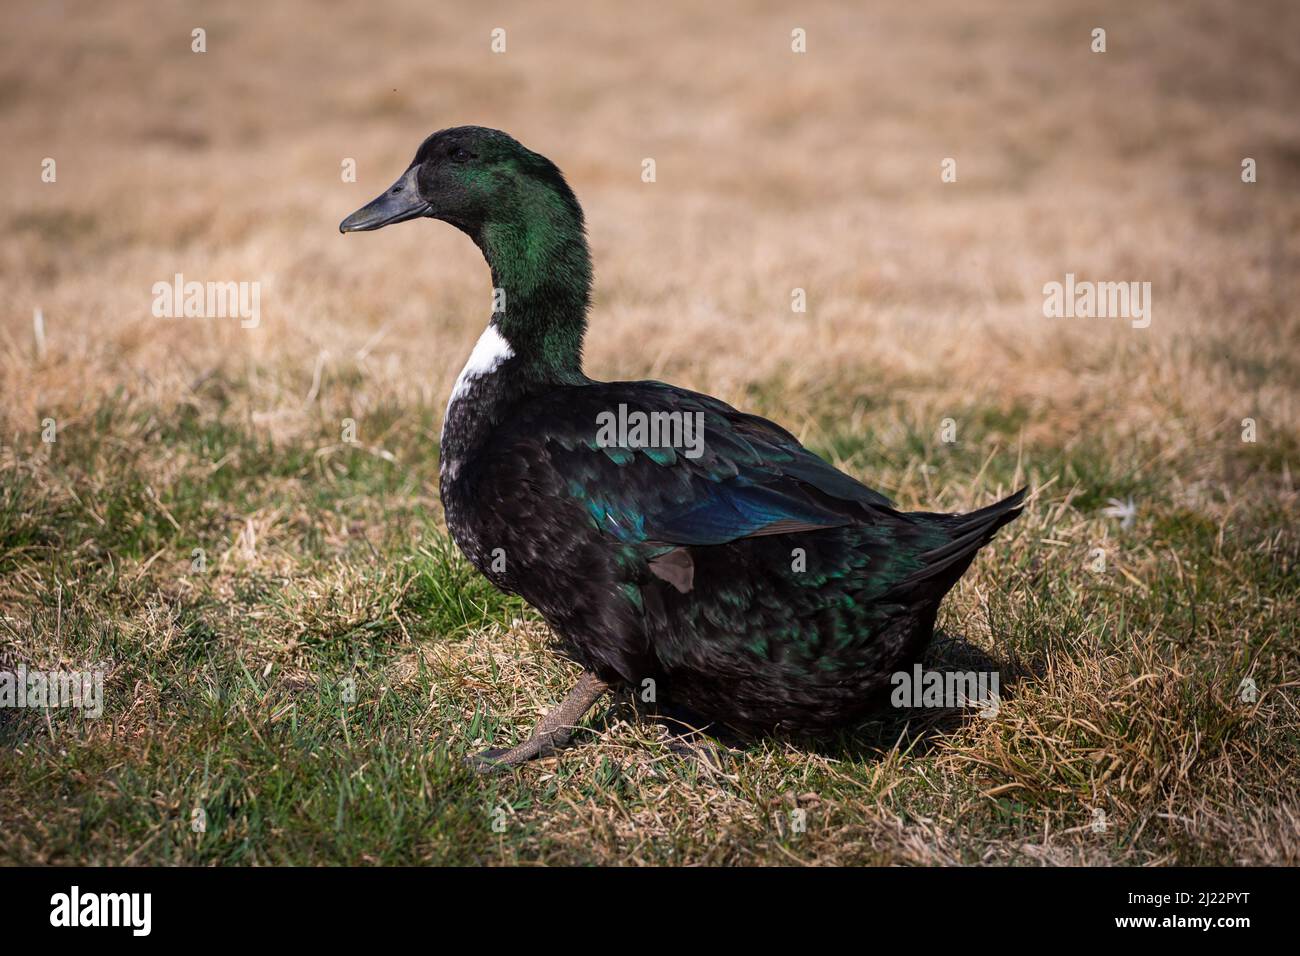 Pommeranian duck, an endangered duck breed from Germany (Pommernente) Stock Photo